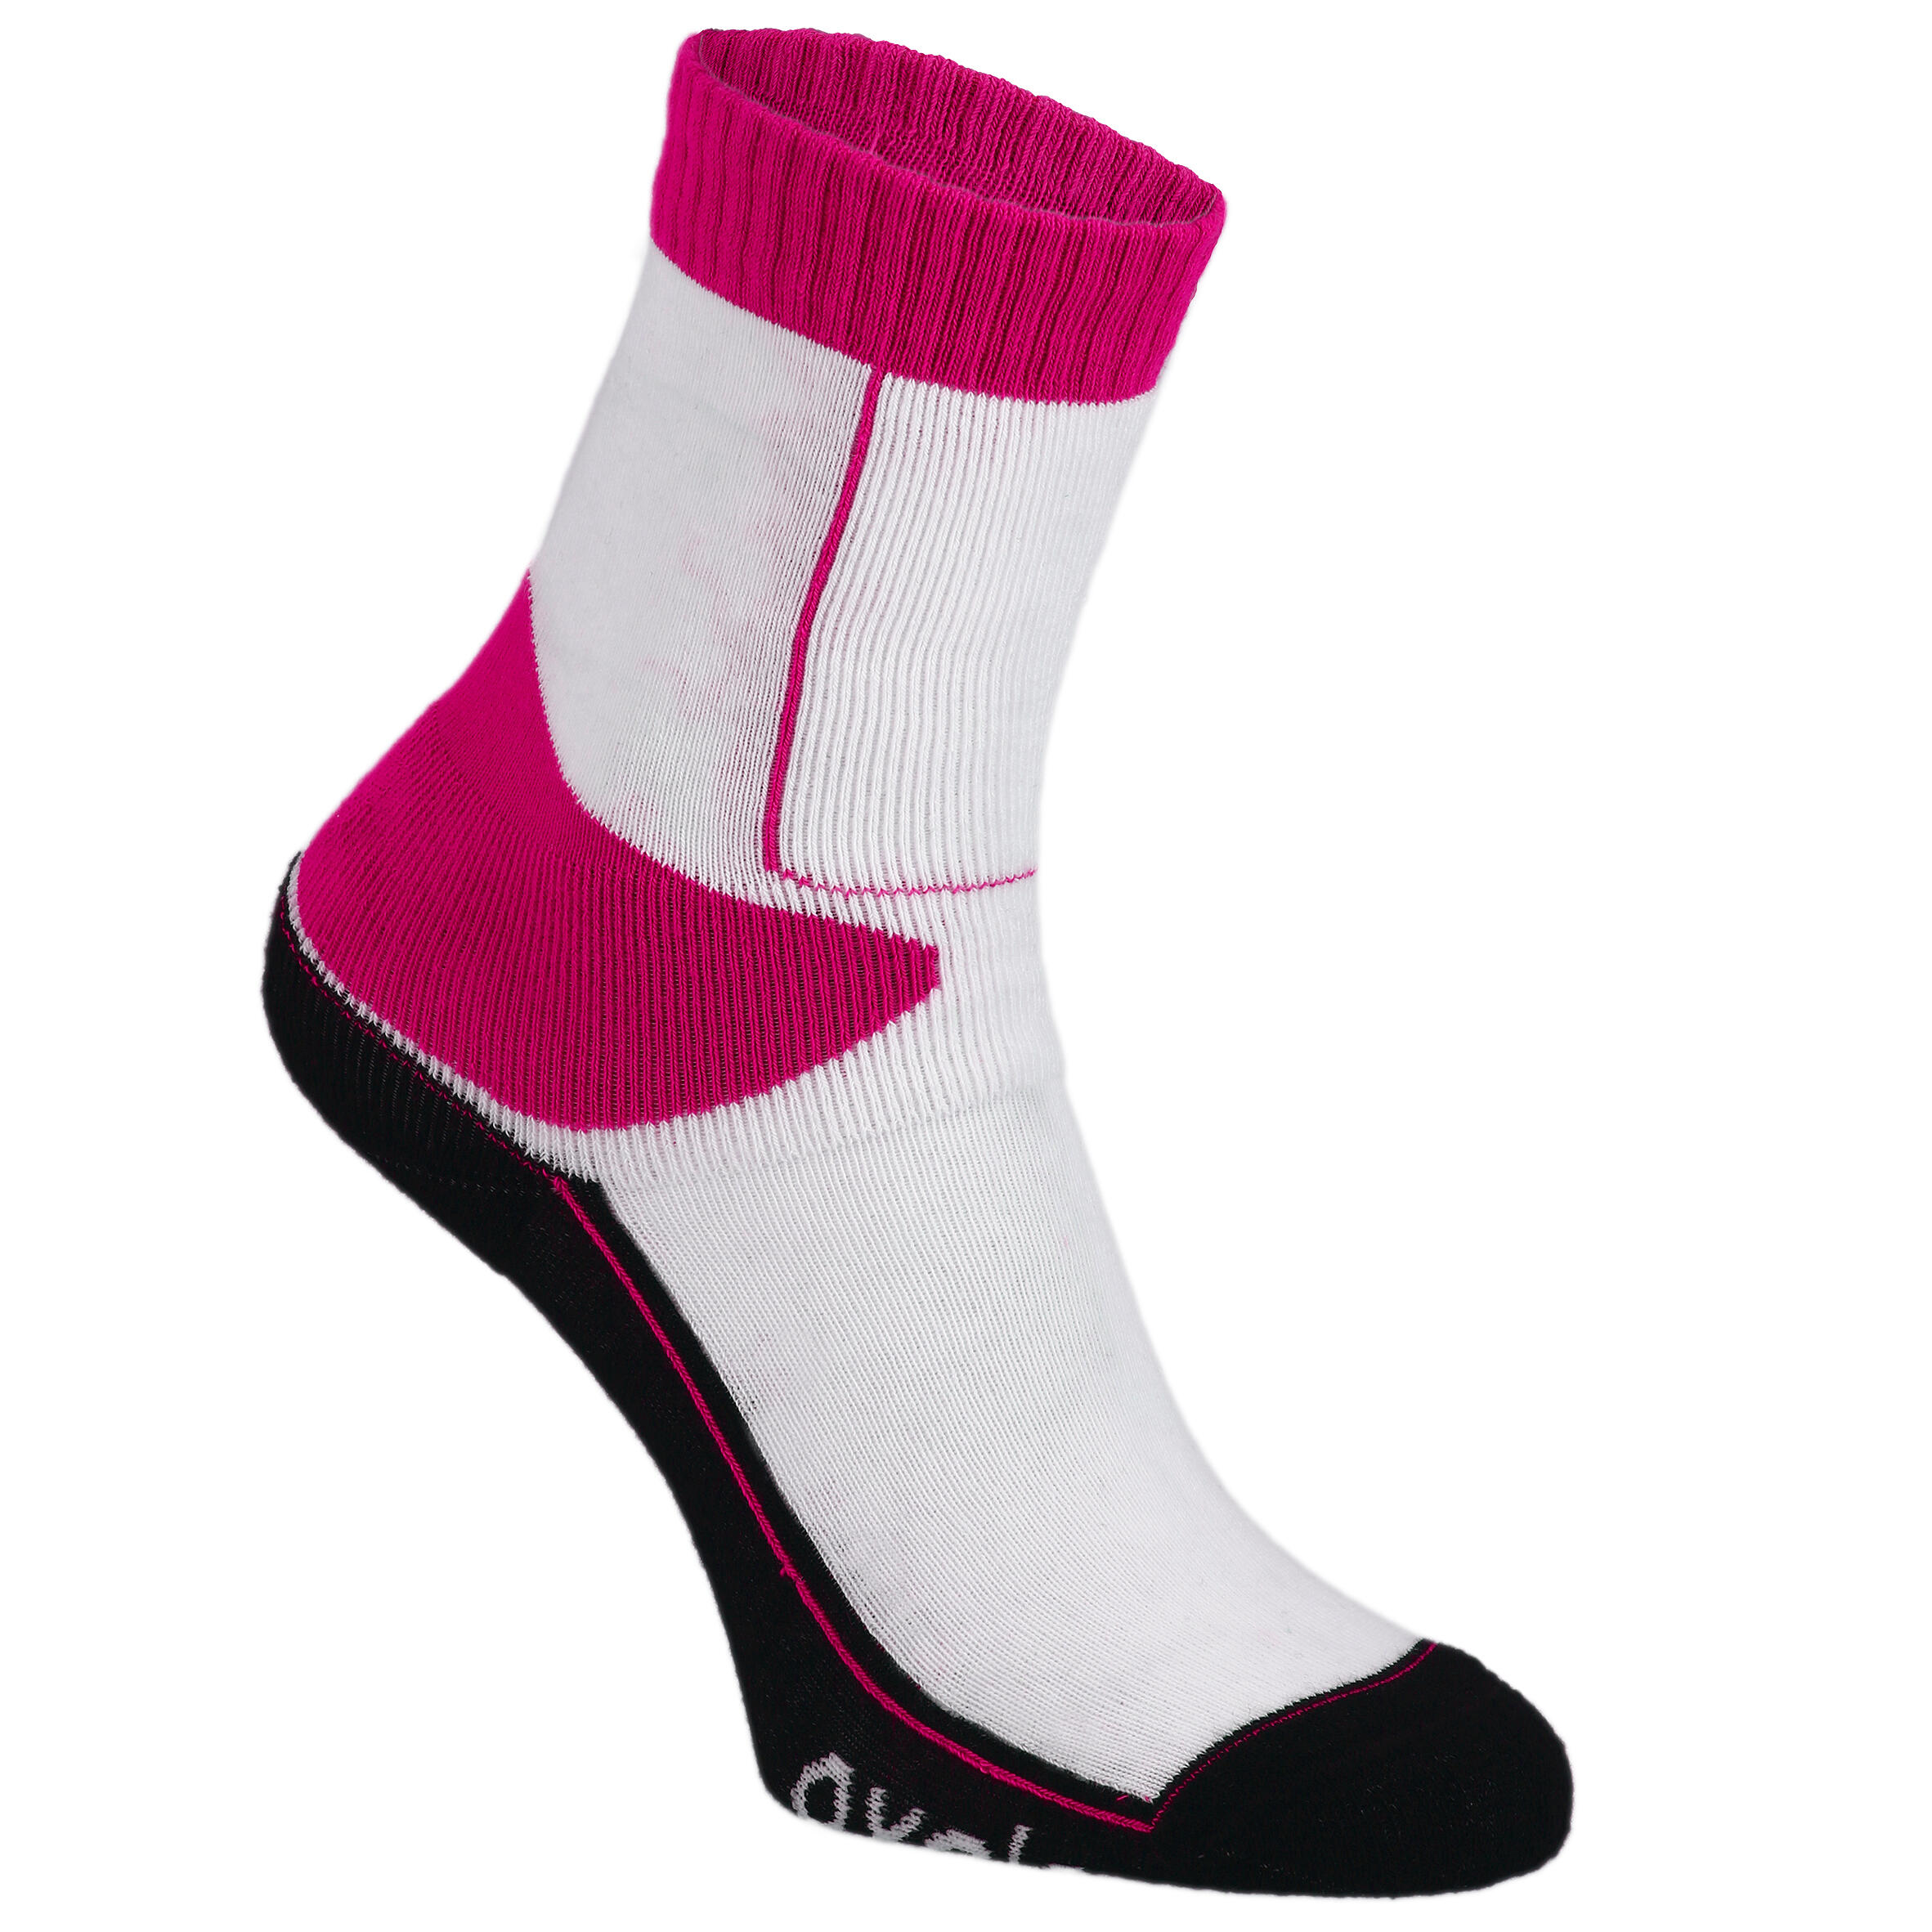 OXELO Skatersocken Oxelo Play Kinder pink/weiss 35/38